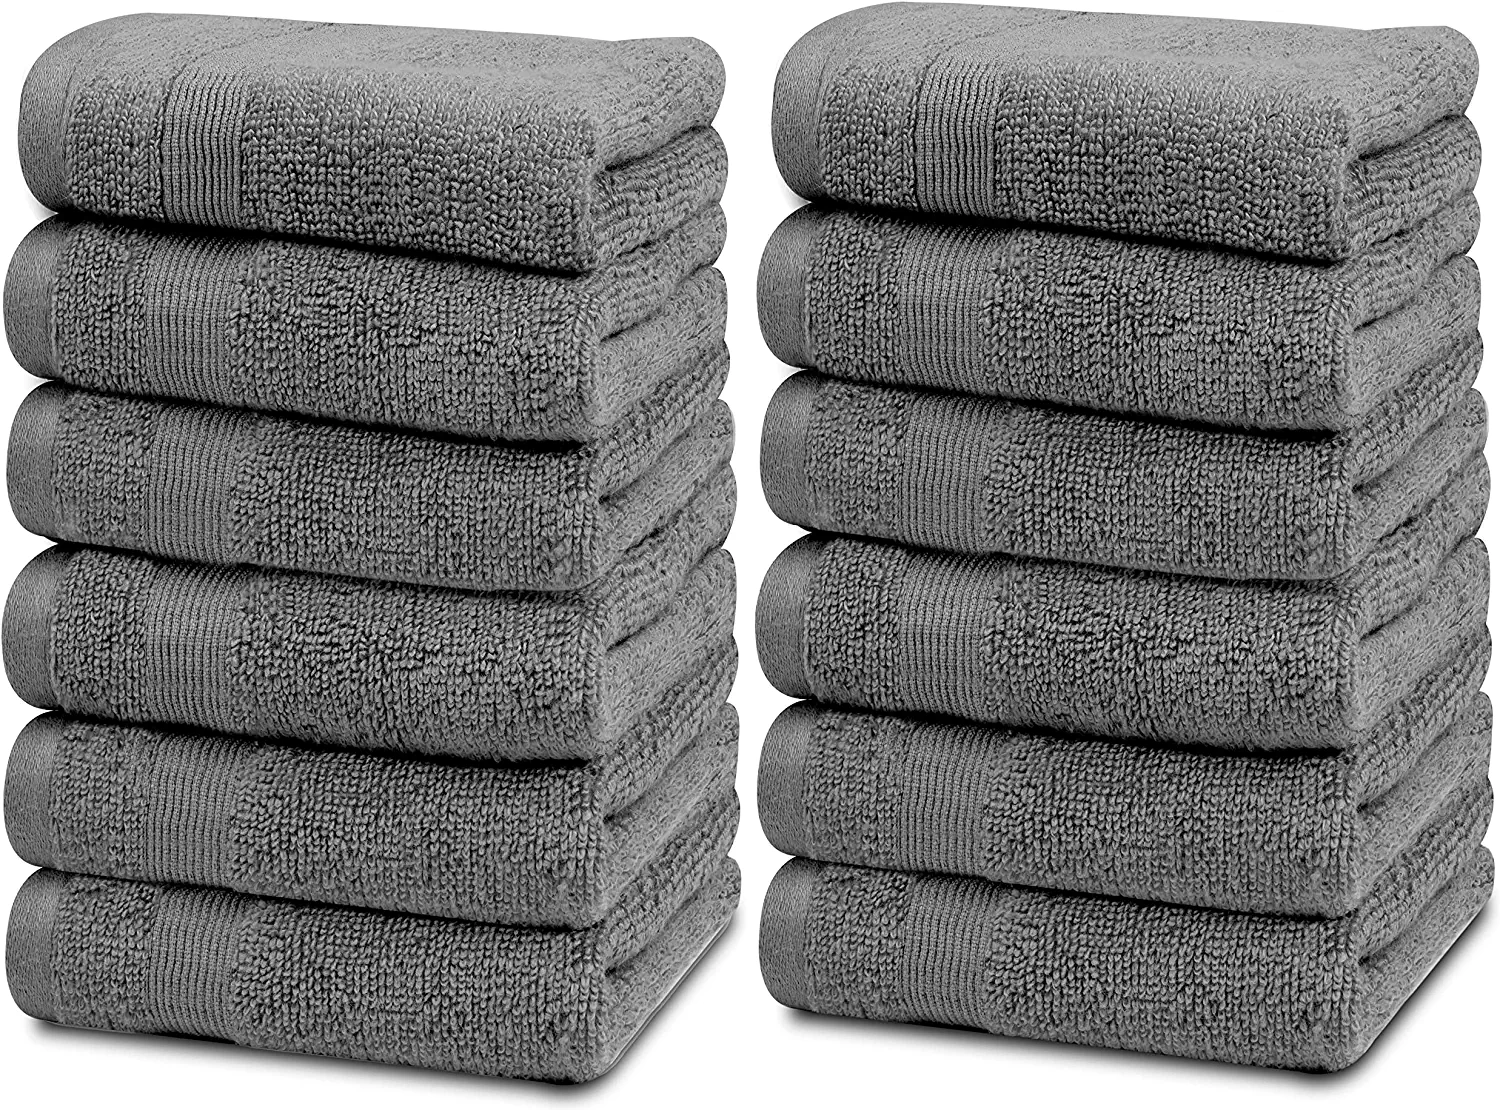 Superio Cotton Terry Washcloths Grey Towels 100% Cotton Cleaning Cloth 16  Rags Wash Clothes for Body and Face Spa Towels Multi Purpose (12 Pack) 12  16x16